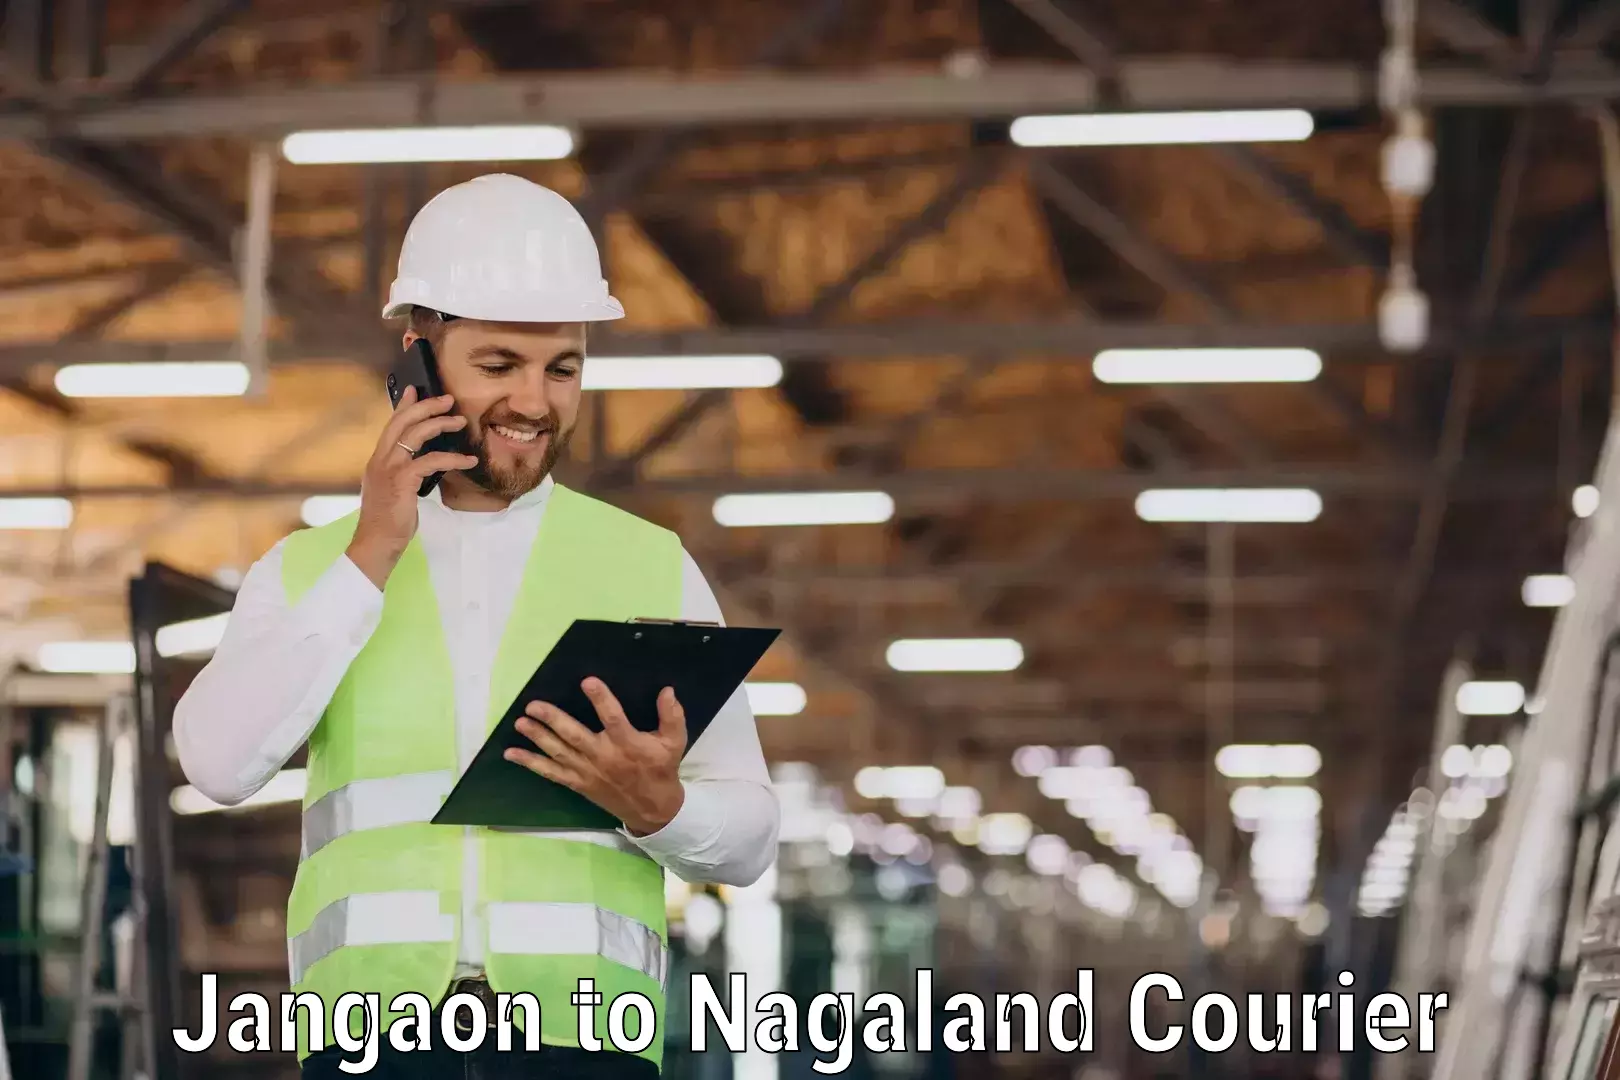 Courier service comparison in Jangaon to NIT Nagaland